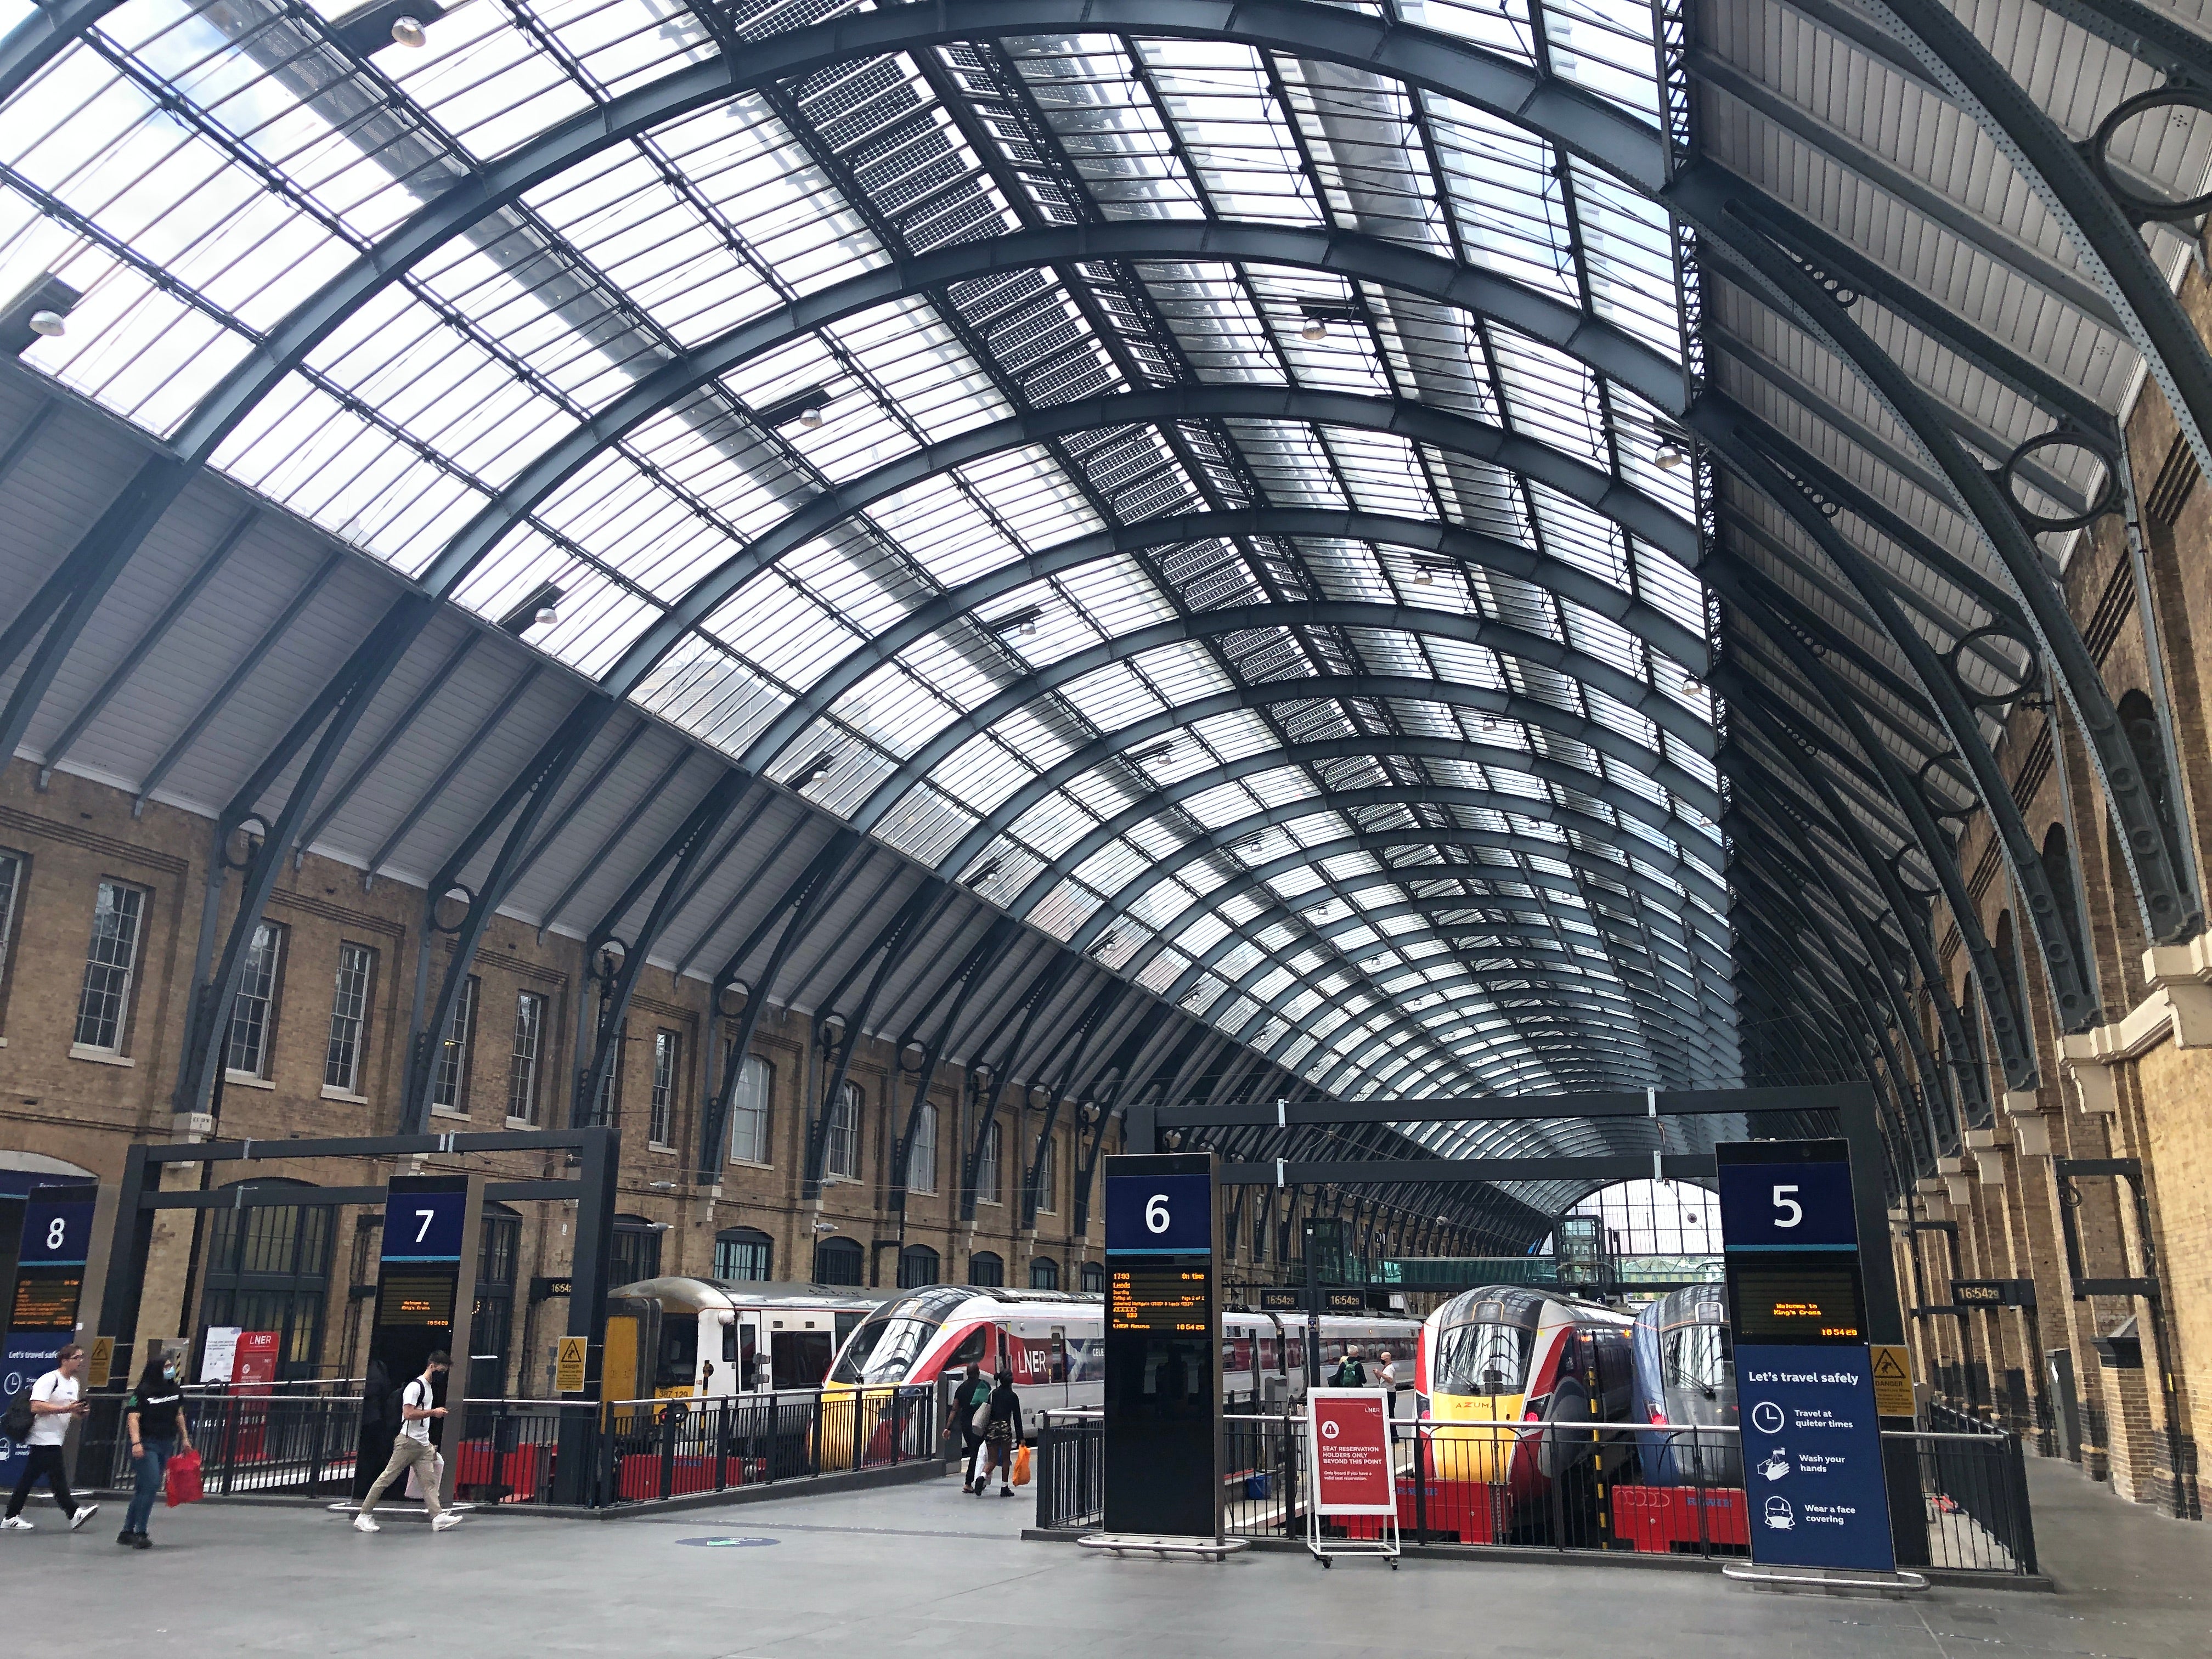 Going places? King’s Cross station in London, the terminus for the East Coast main line